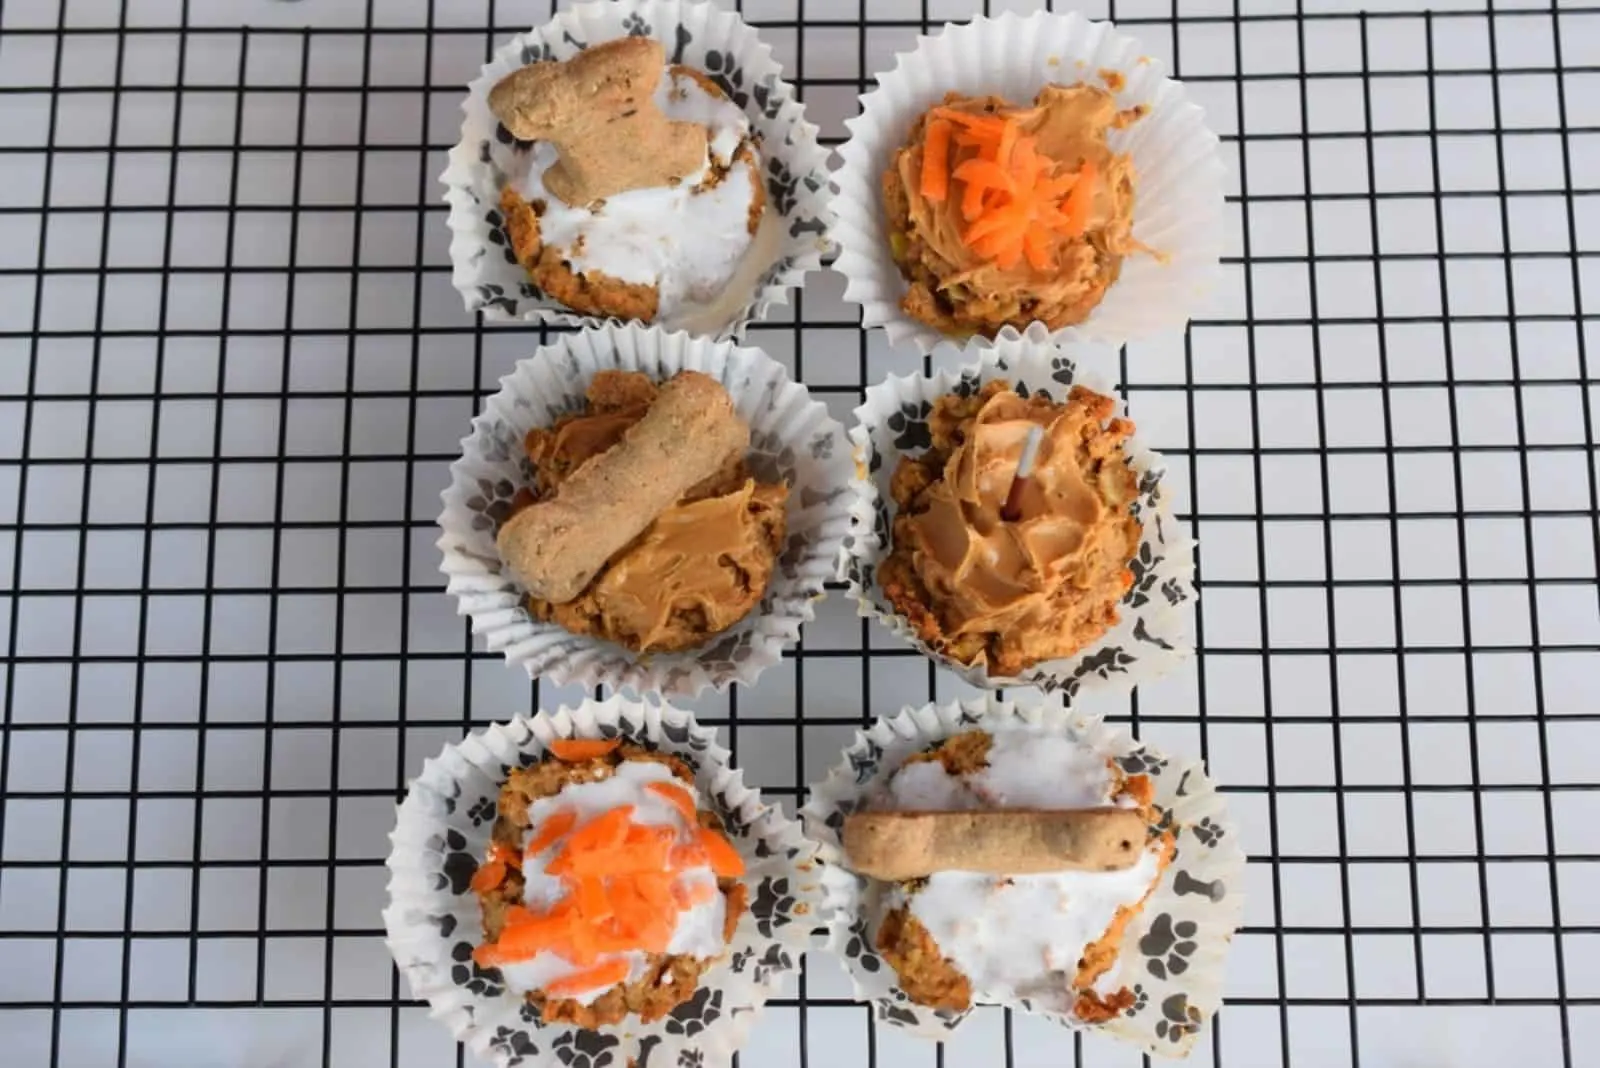 Homemade pup cakes with a variety of topping; carrots, peanut butter and bone treats on metal rack.